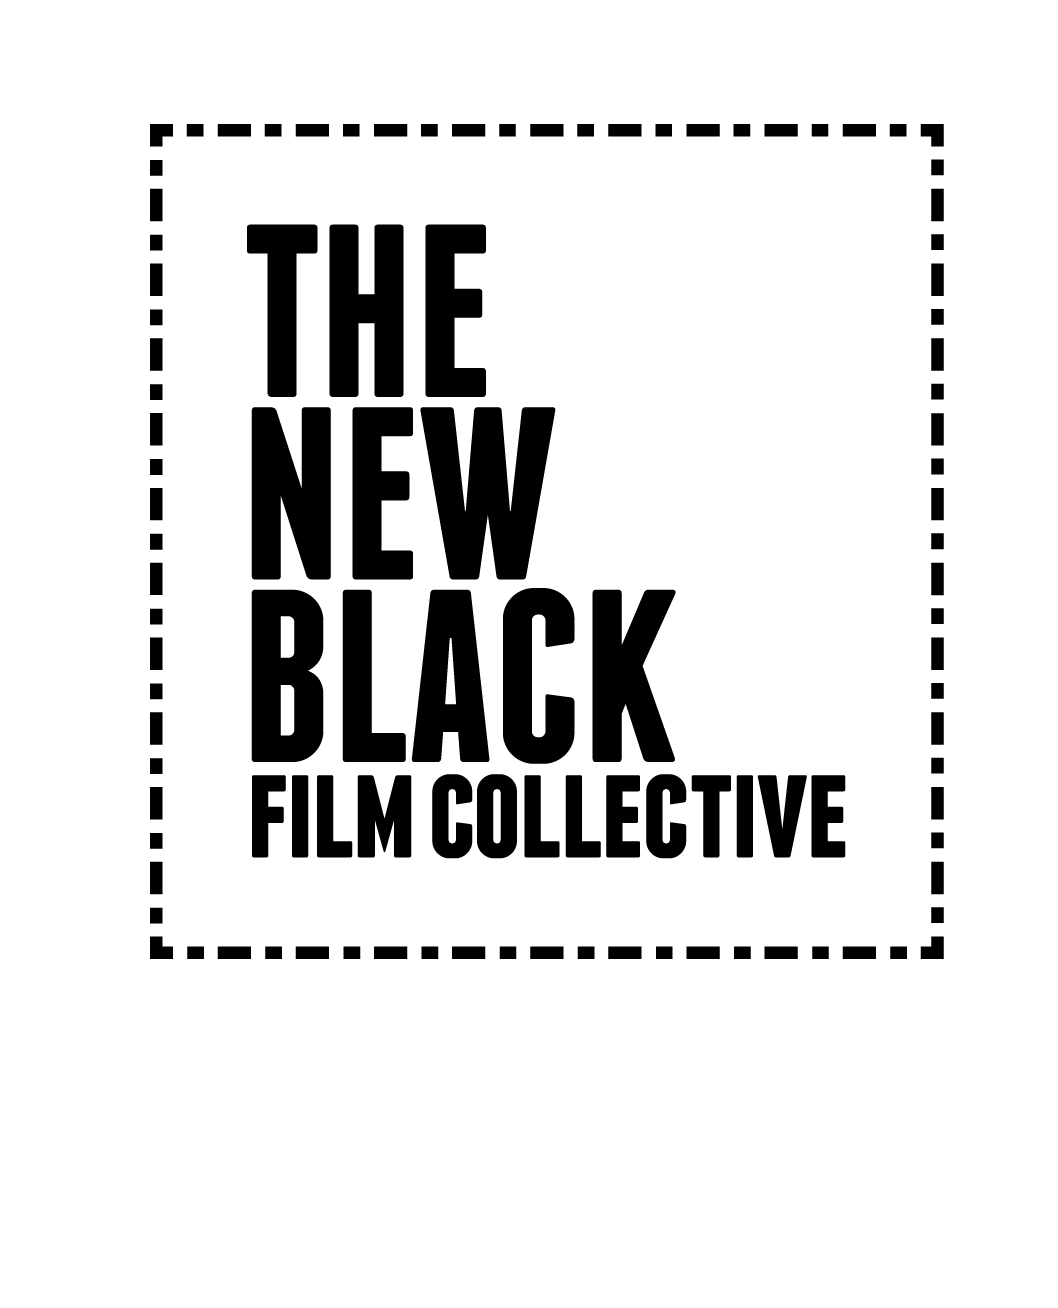 New Black Film Collective Open City Documentary Festival